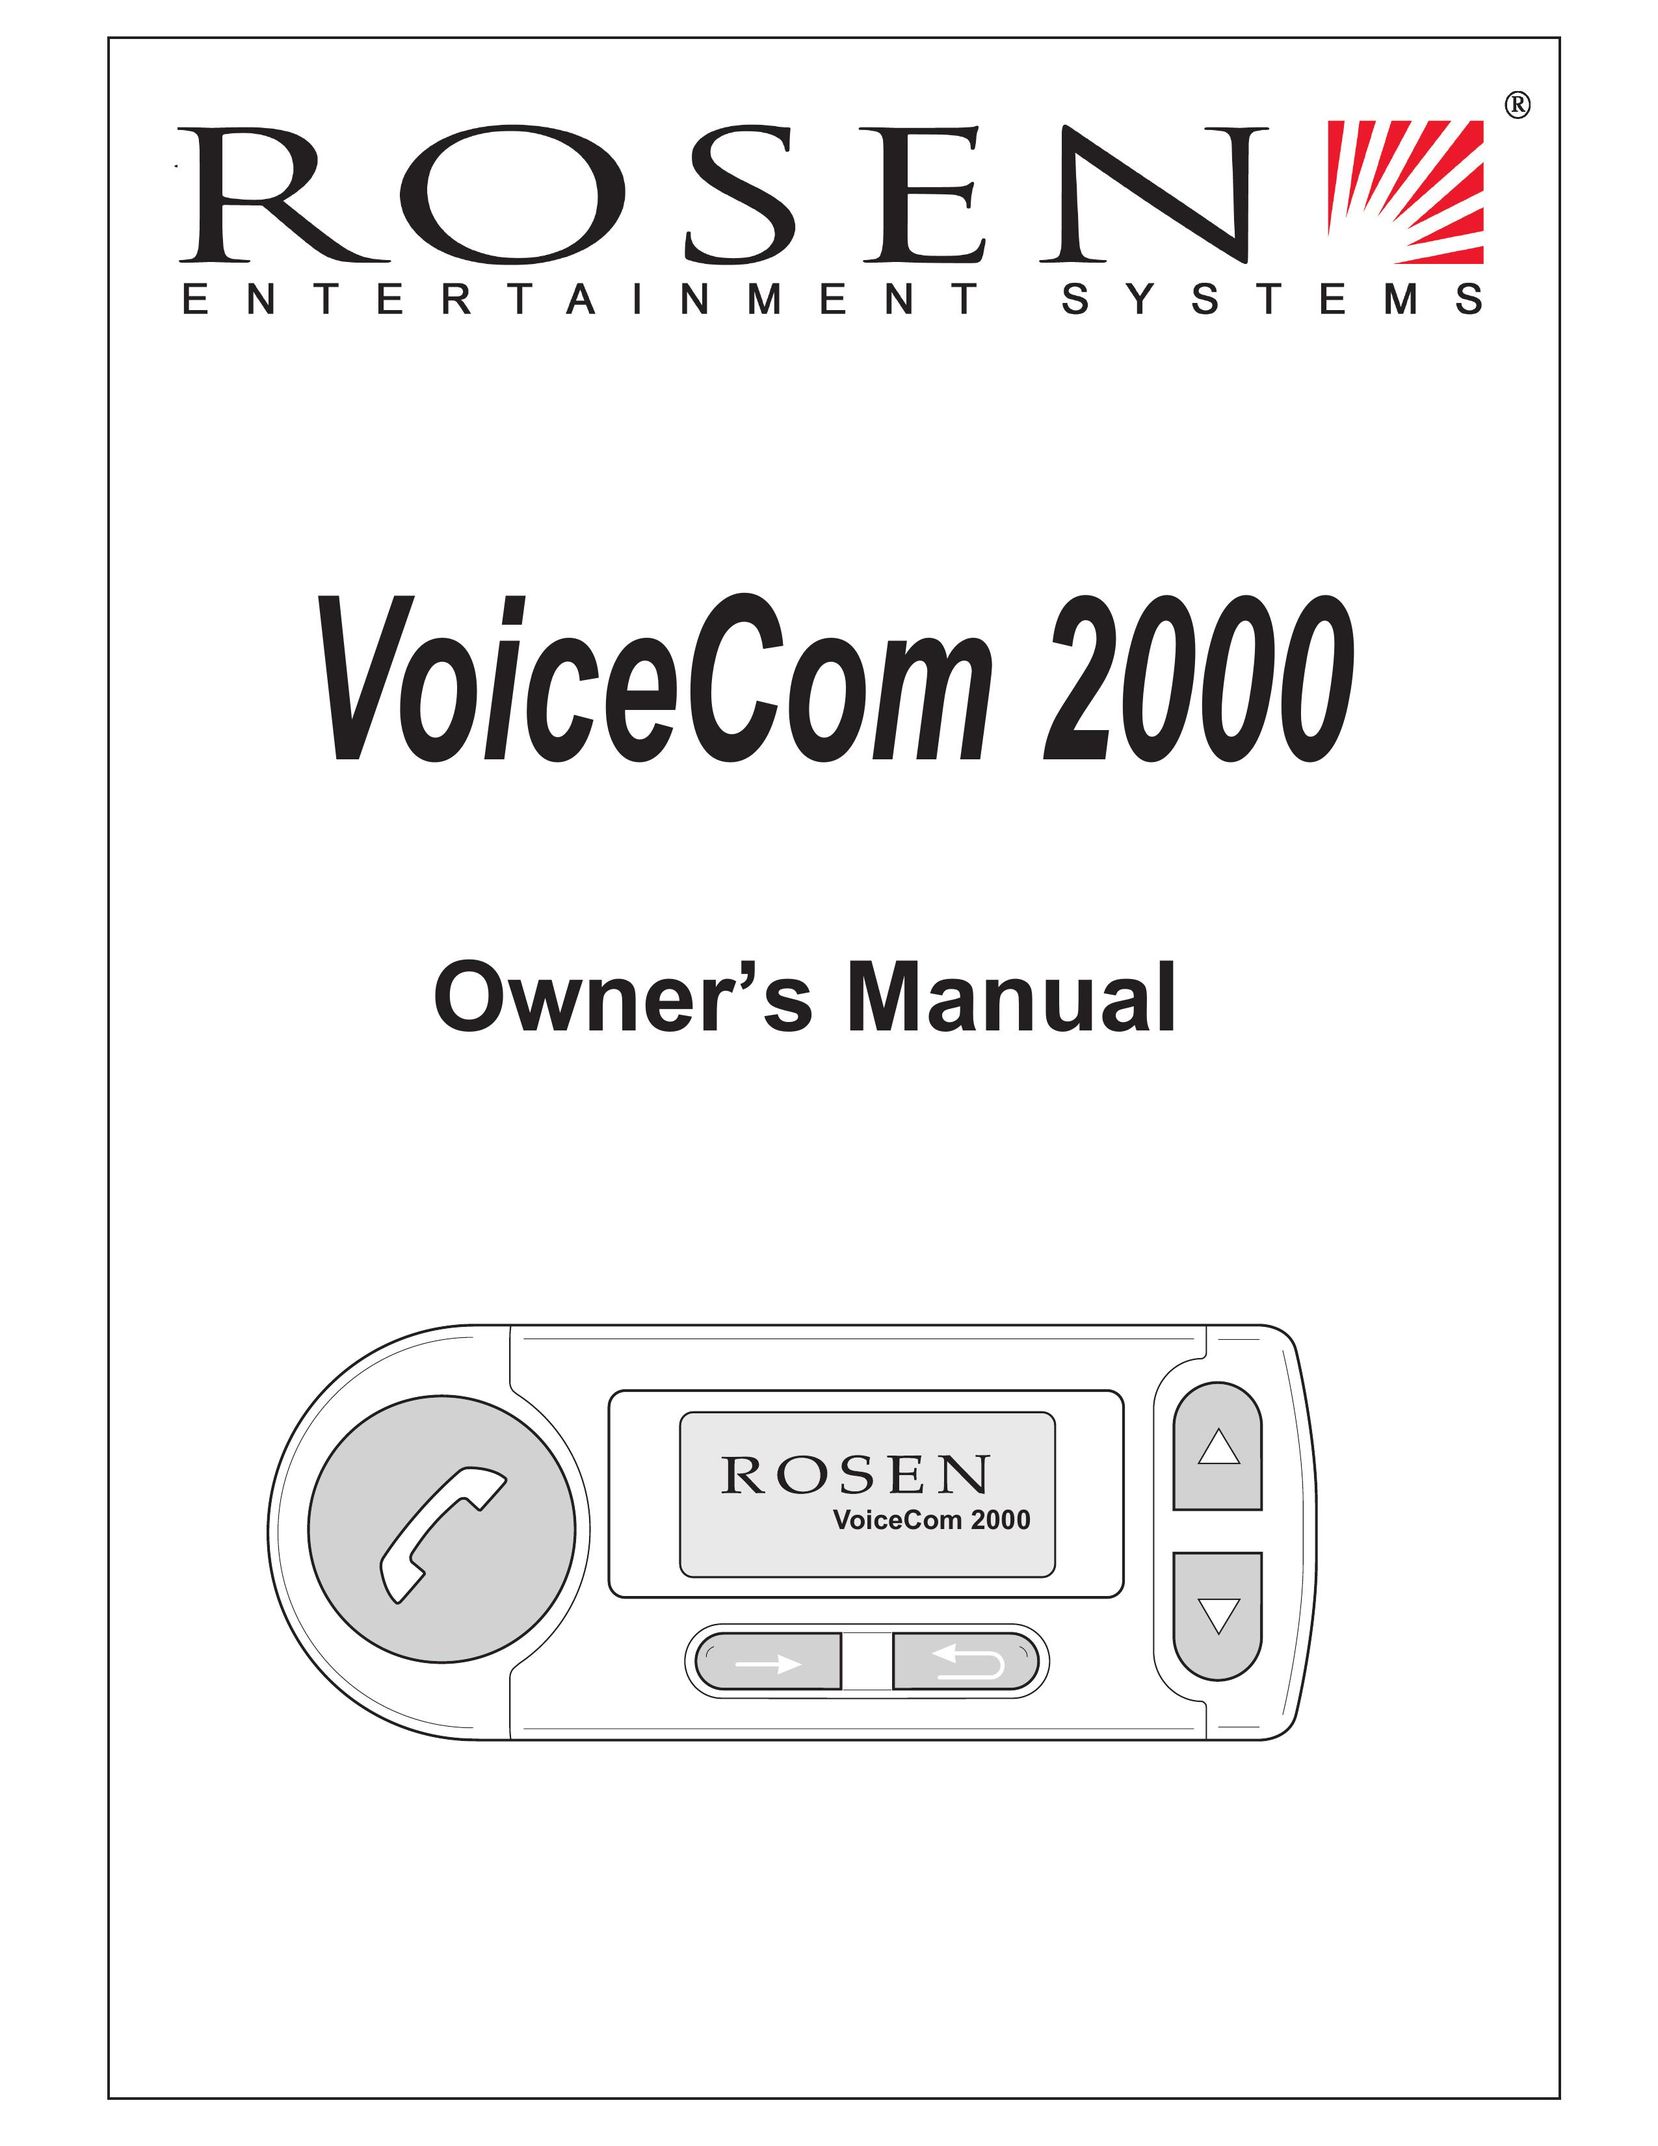 Rosen Entertainment Systems VoiceCom2000 IP Phone User Manual